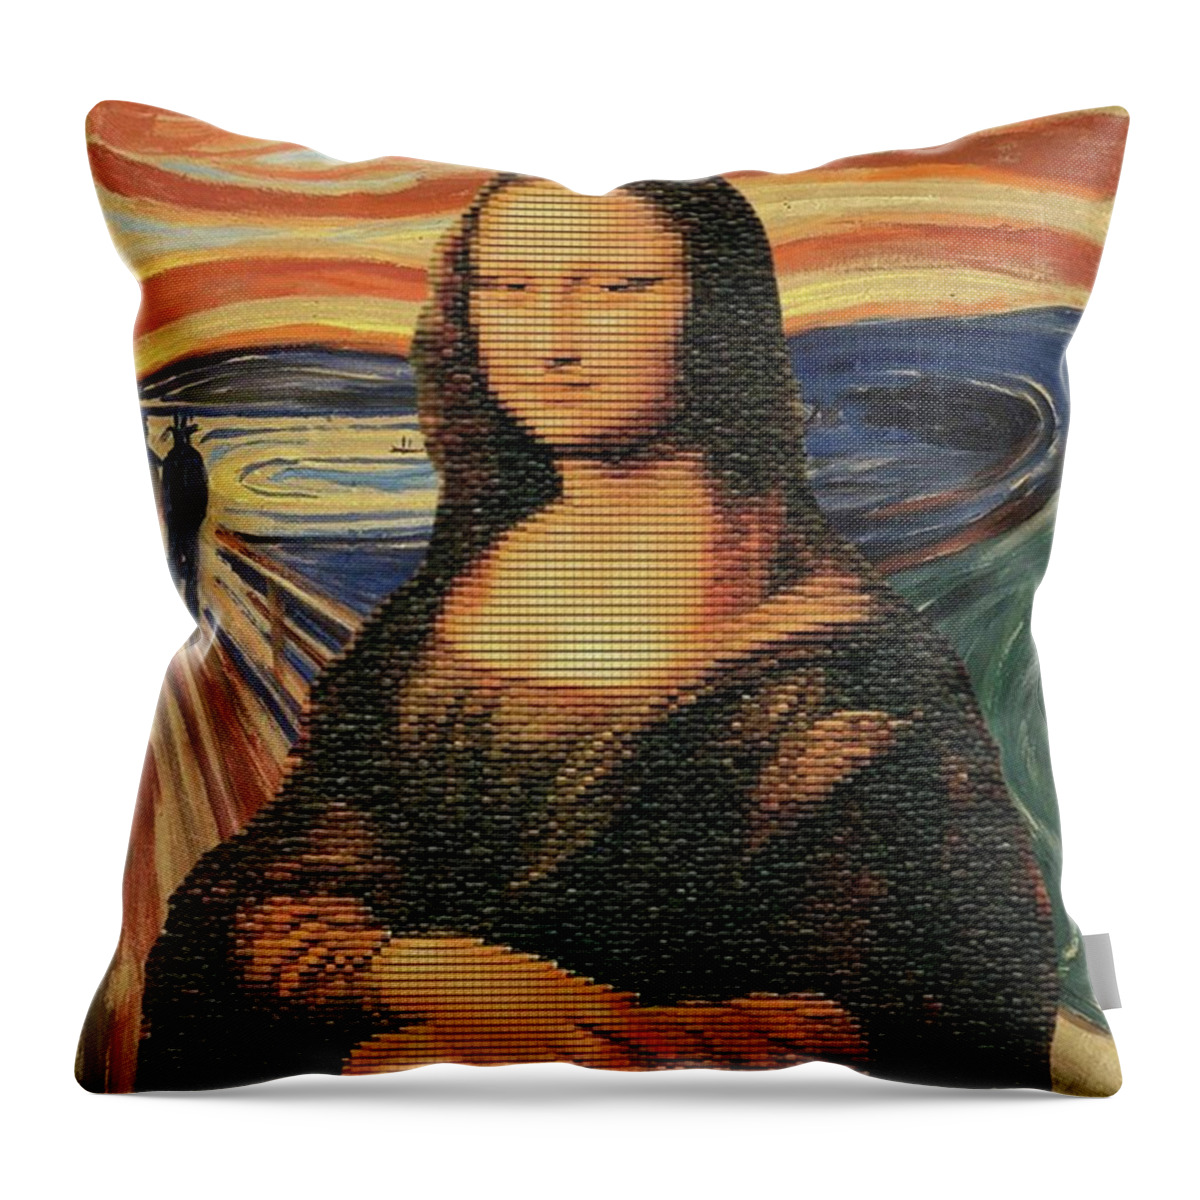 Monalisa Throw Pillow featuring the photograph Mona Lisa Is Stealing The Spot by Alessio Cicalini